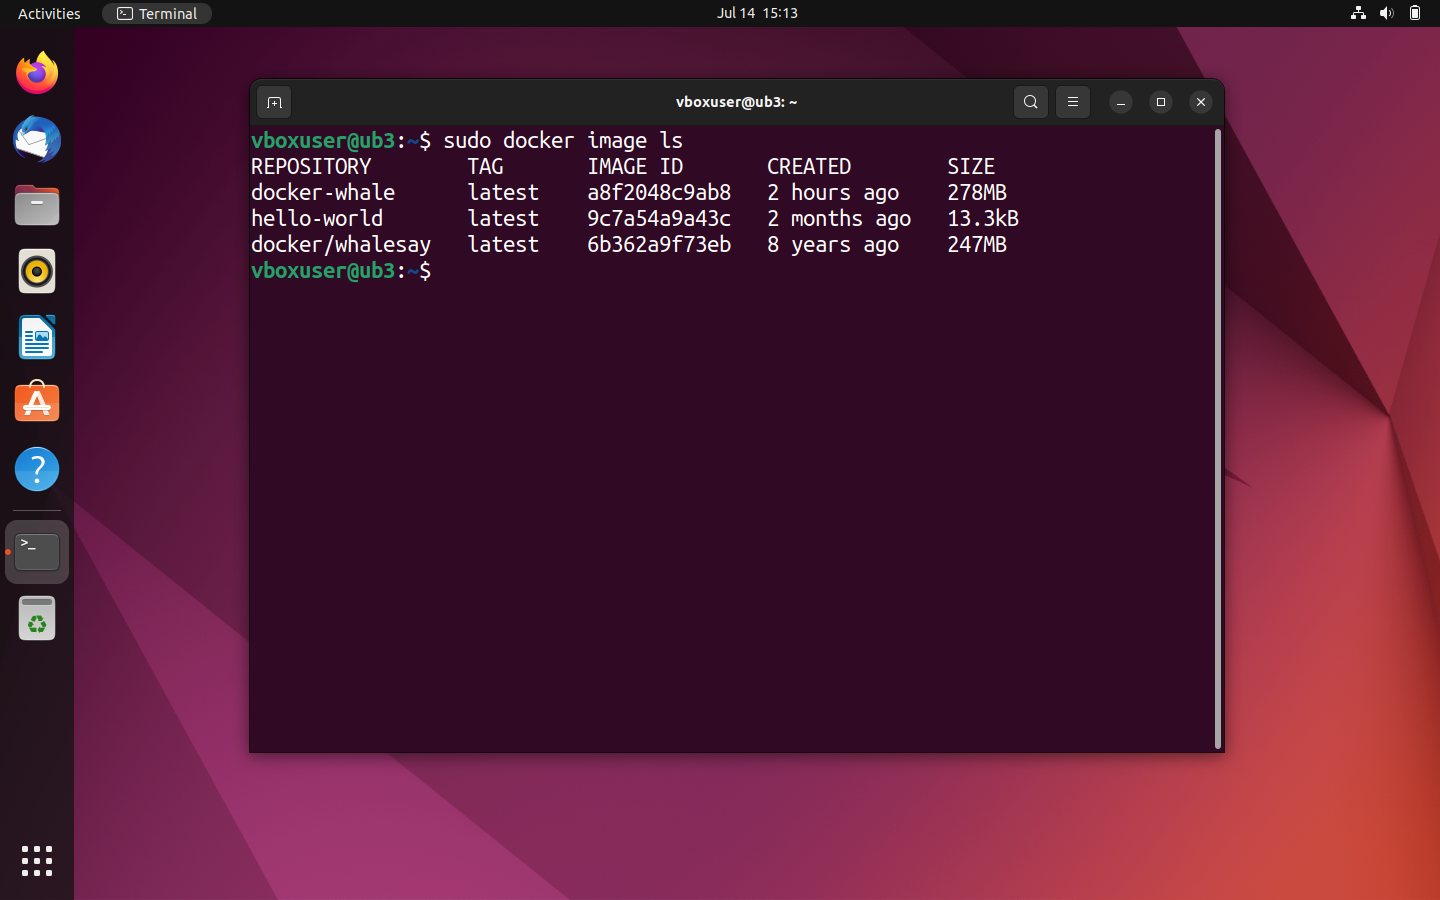 Overview of all local images in the Ubuntu terminal